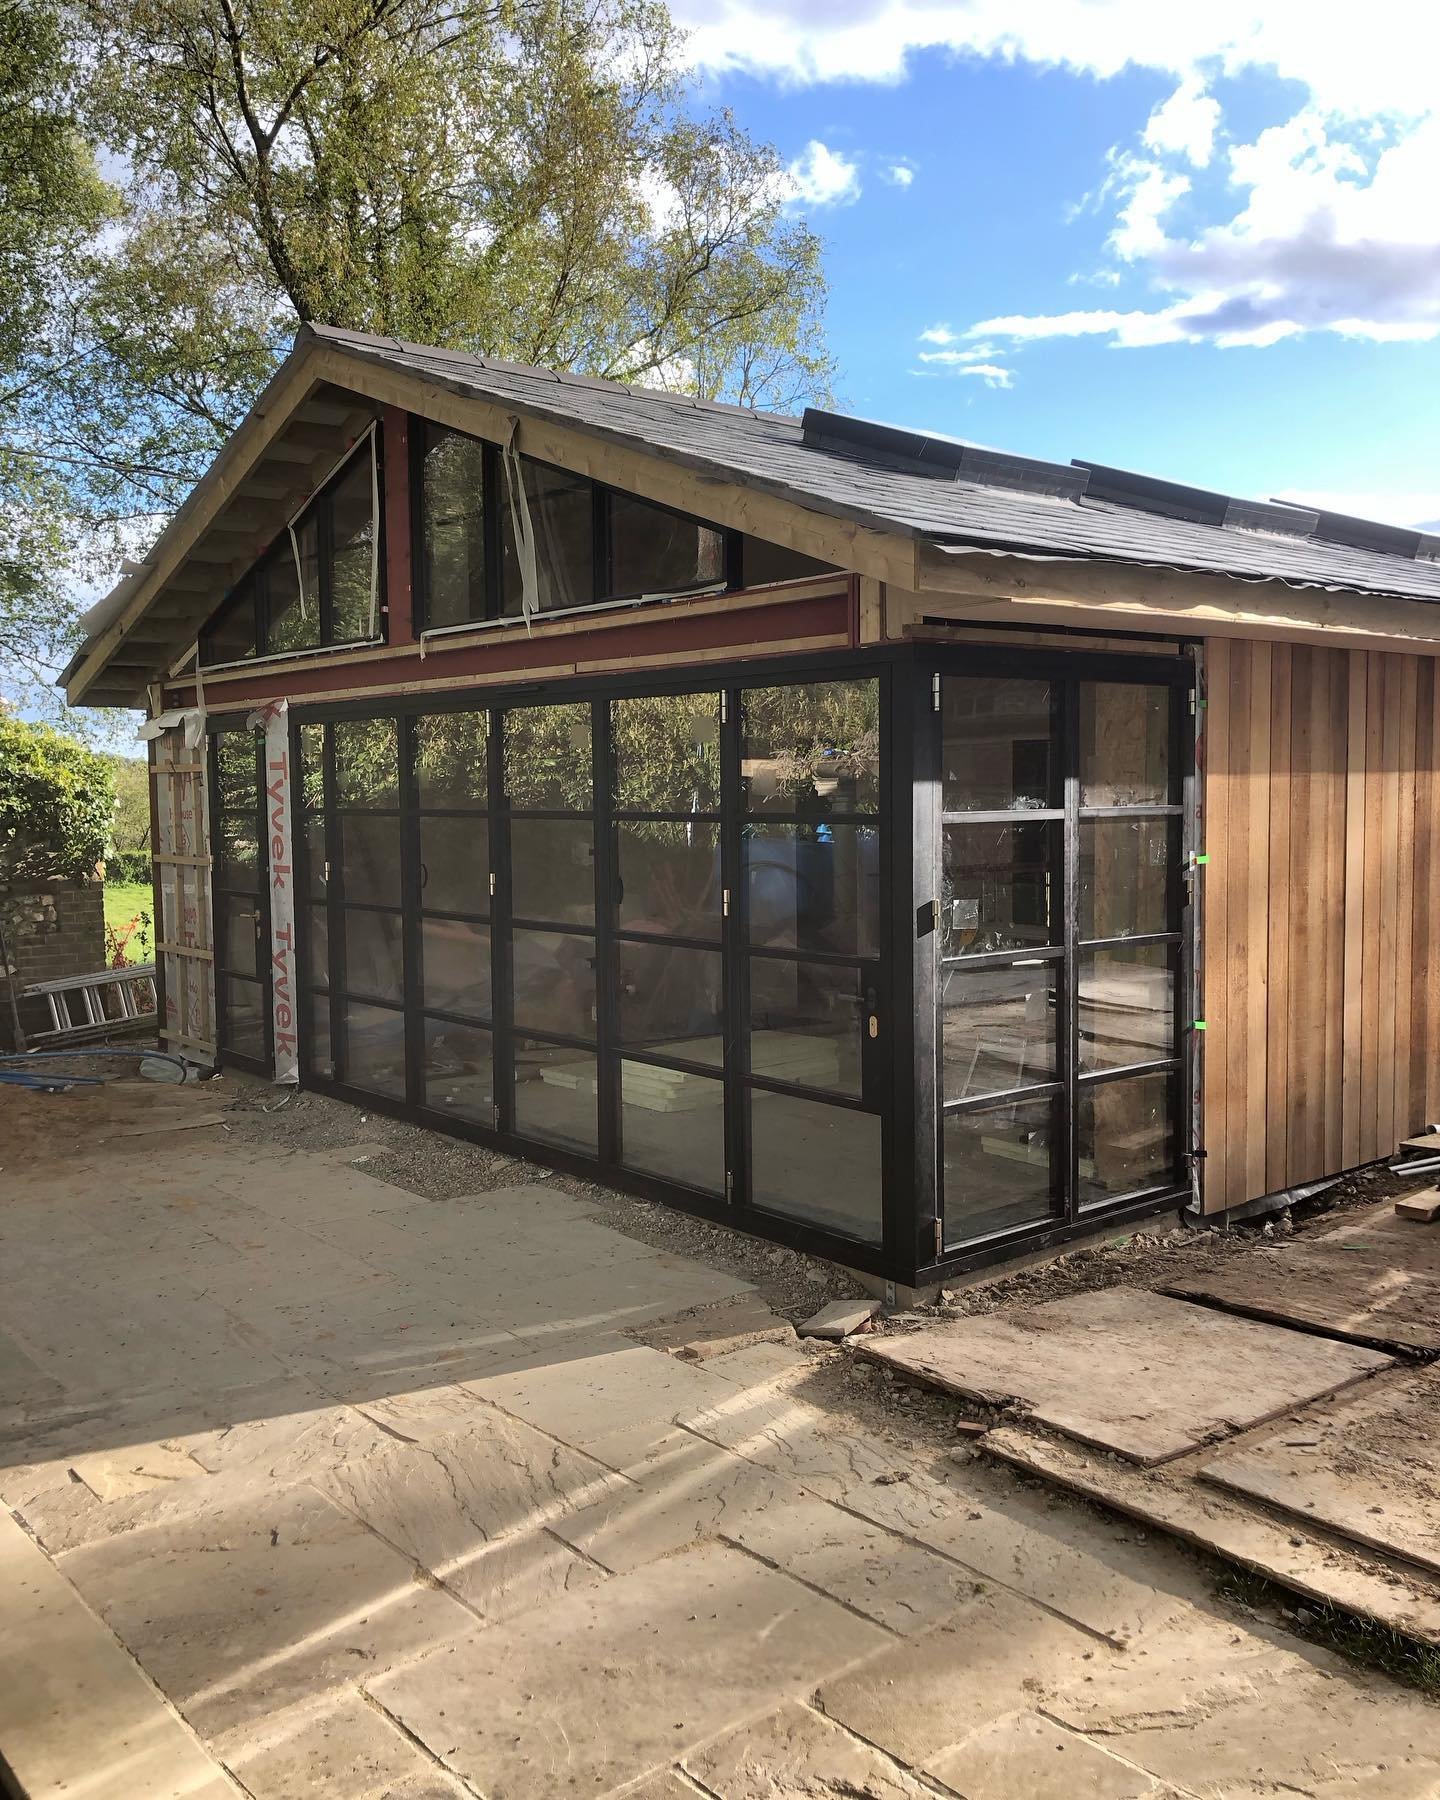 Todays fun and games installing these beautiful @origin_global corner bifolds. These will really bring the outdoors in once the projects complete ☀️

#poolhouse #outbuilding #guesthouse #bifolddoors